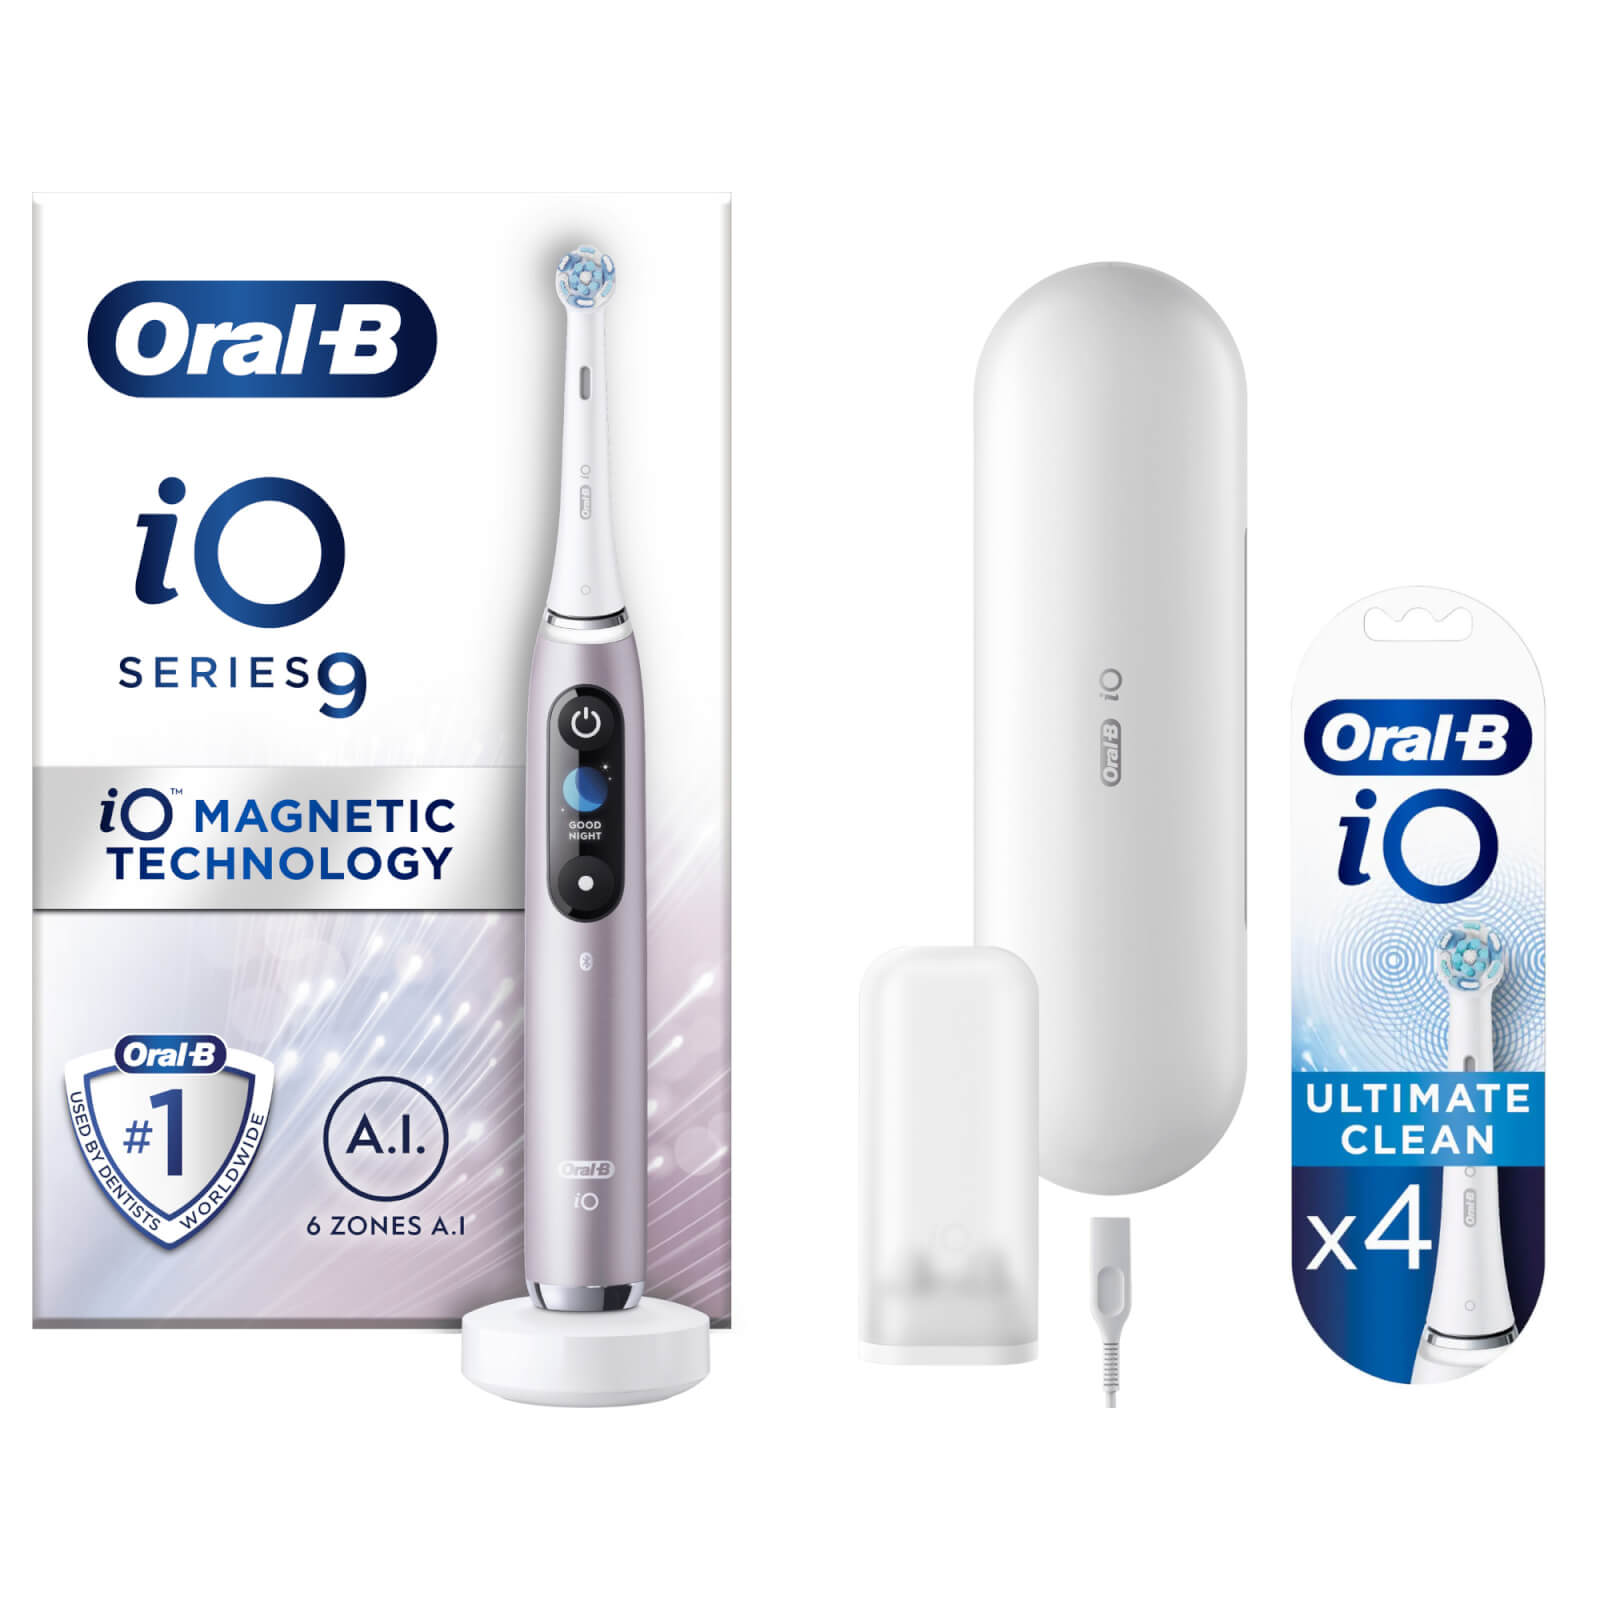 Oral B iO9 Rose Quartz Electric Toothbrush with Charging Travel Case - Toothbrush + 4 Refills